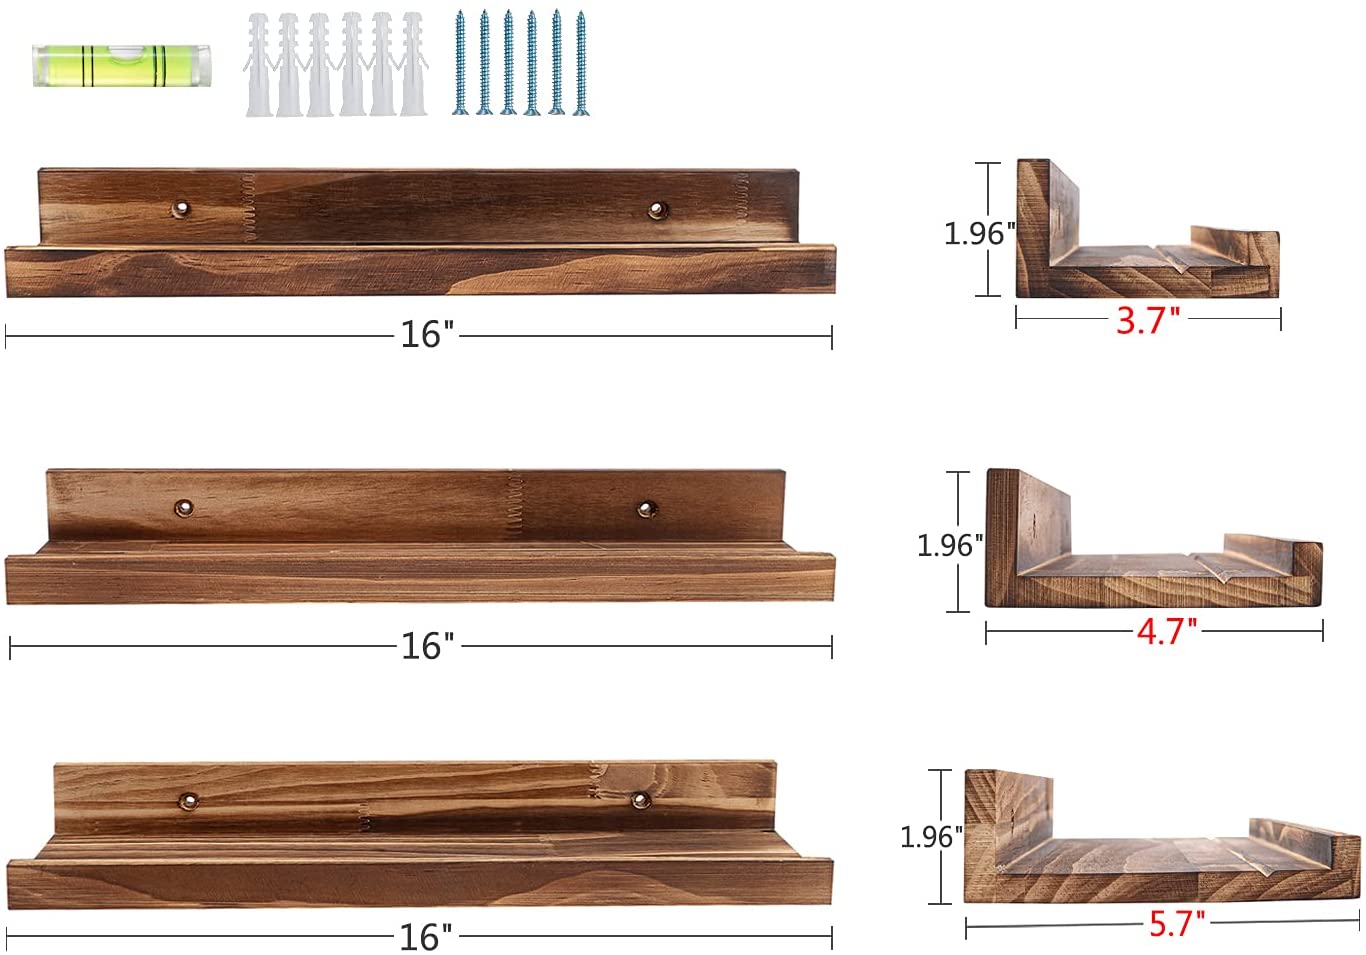 Wall Shelves Set of 3 ,Picture Ledge Shelf Wood for bedrooms,Office,Living Room, Kitchen 